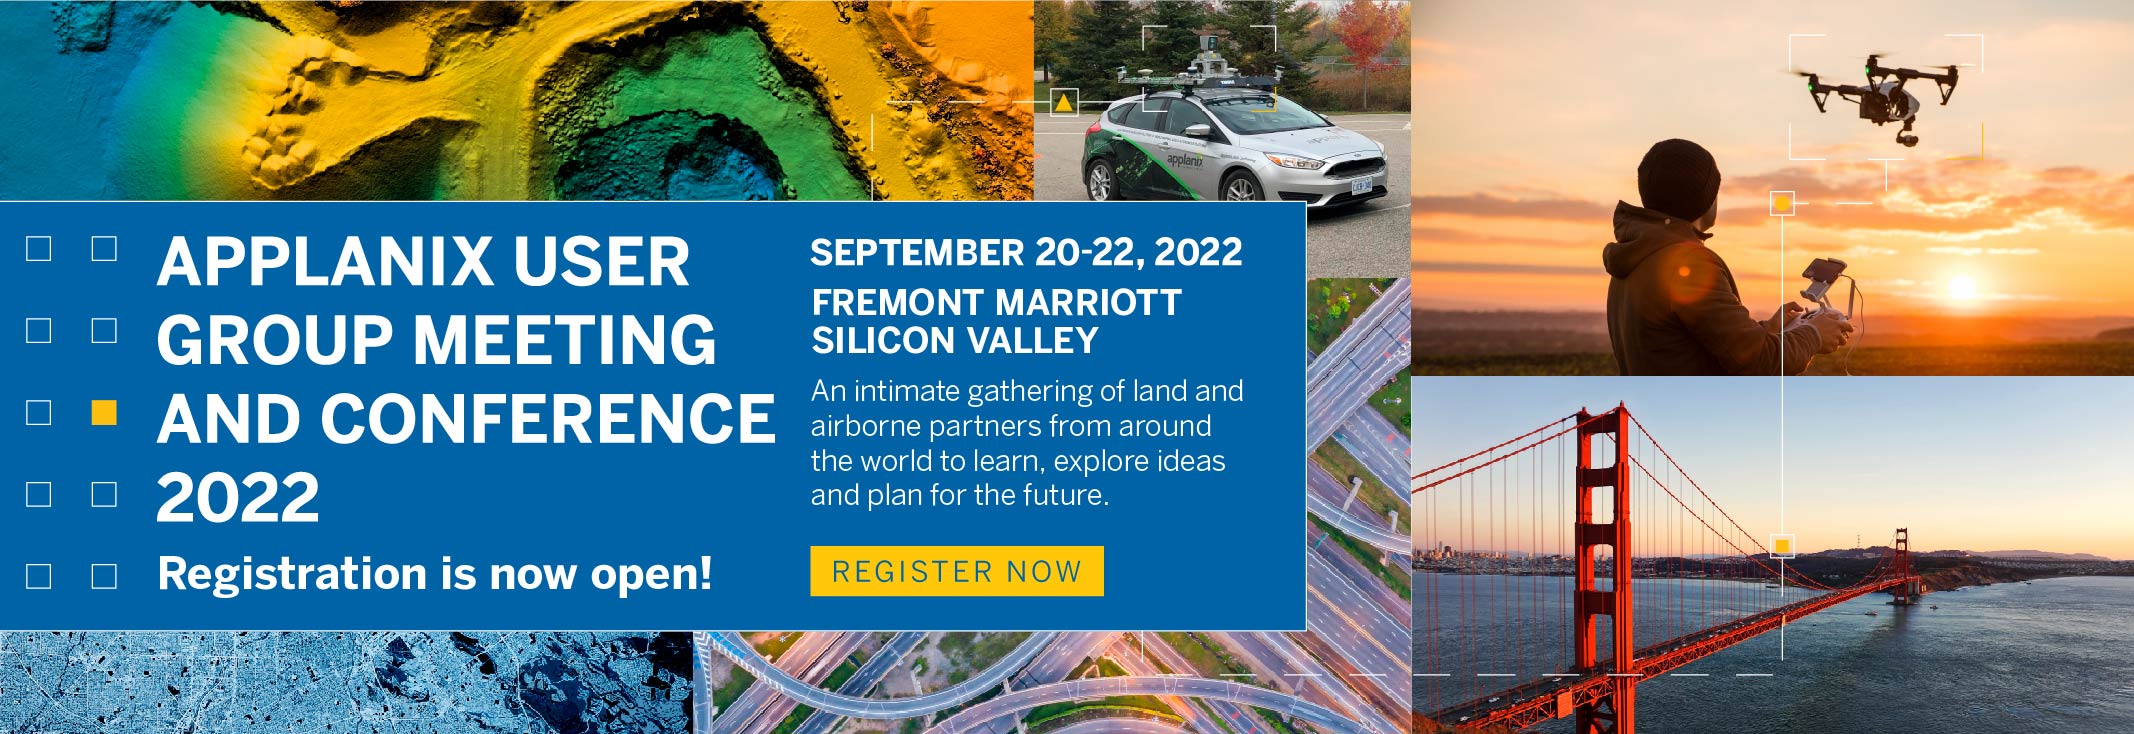 Register now for the Applanix User Group Meeting and Conference 2022! Sept 20-22, 2022 at Fremont Marriott Silicon Valley | An intimate gathering of land and airborne partners from around the world to learn, explore ideas and plan for the future.